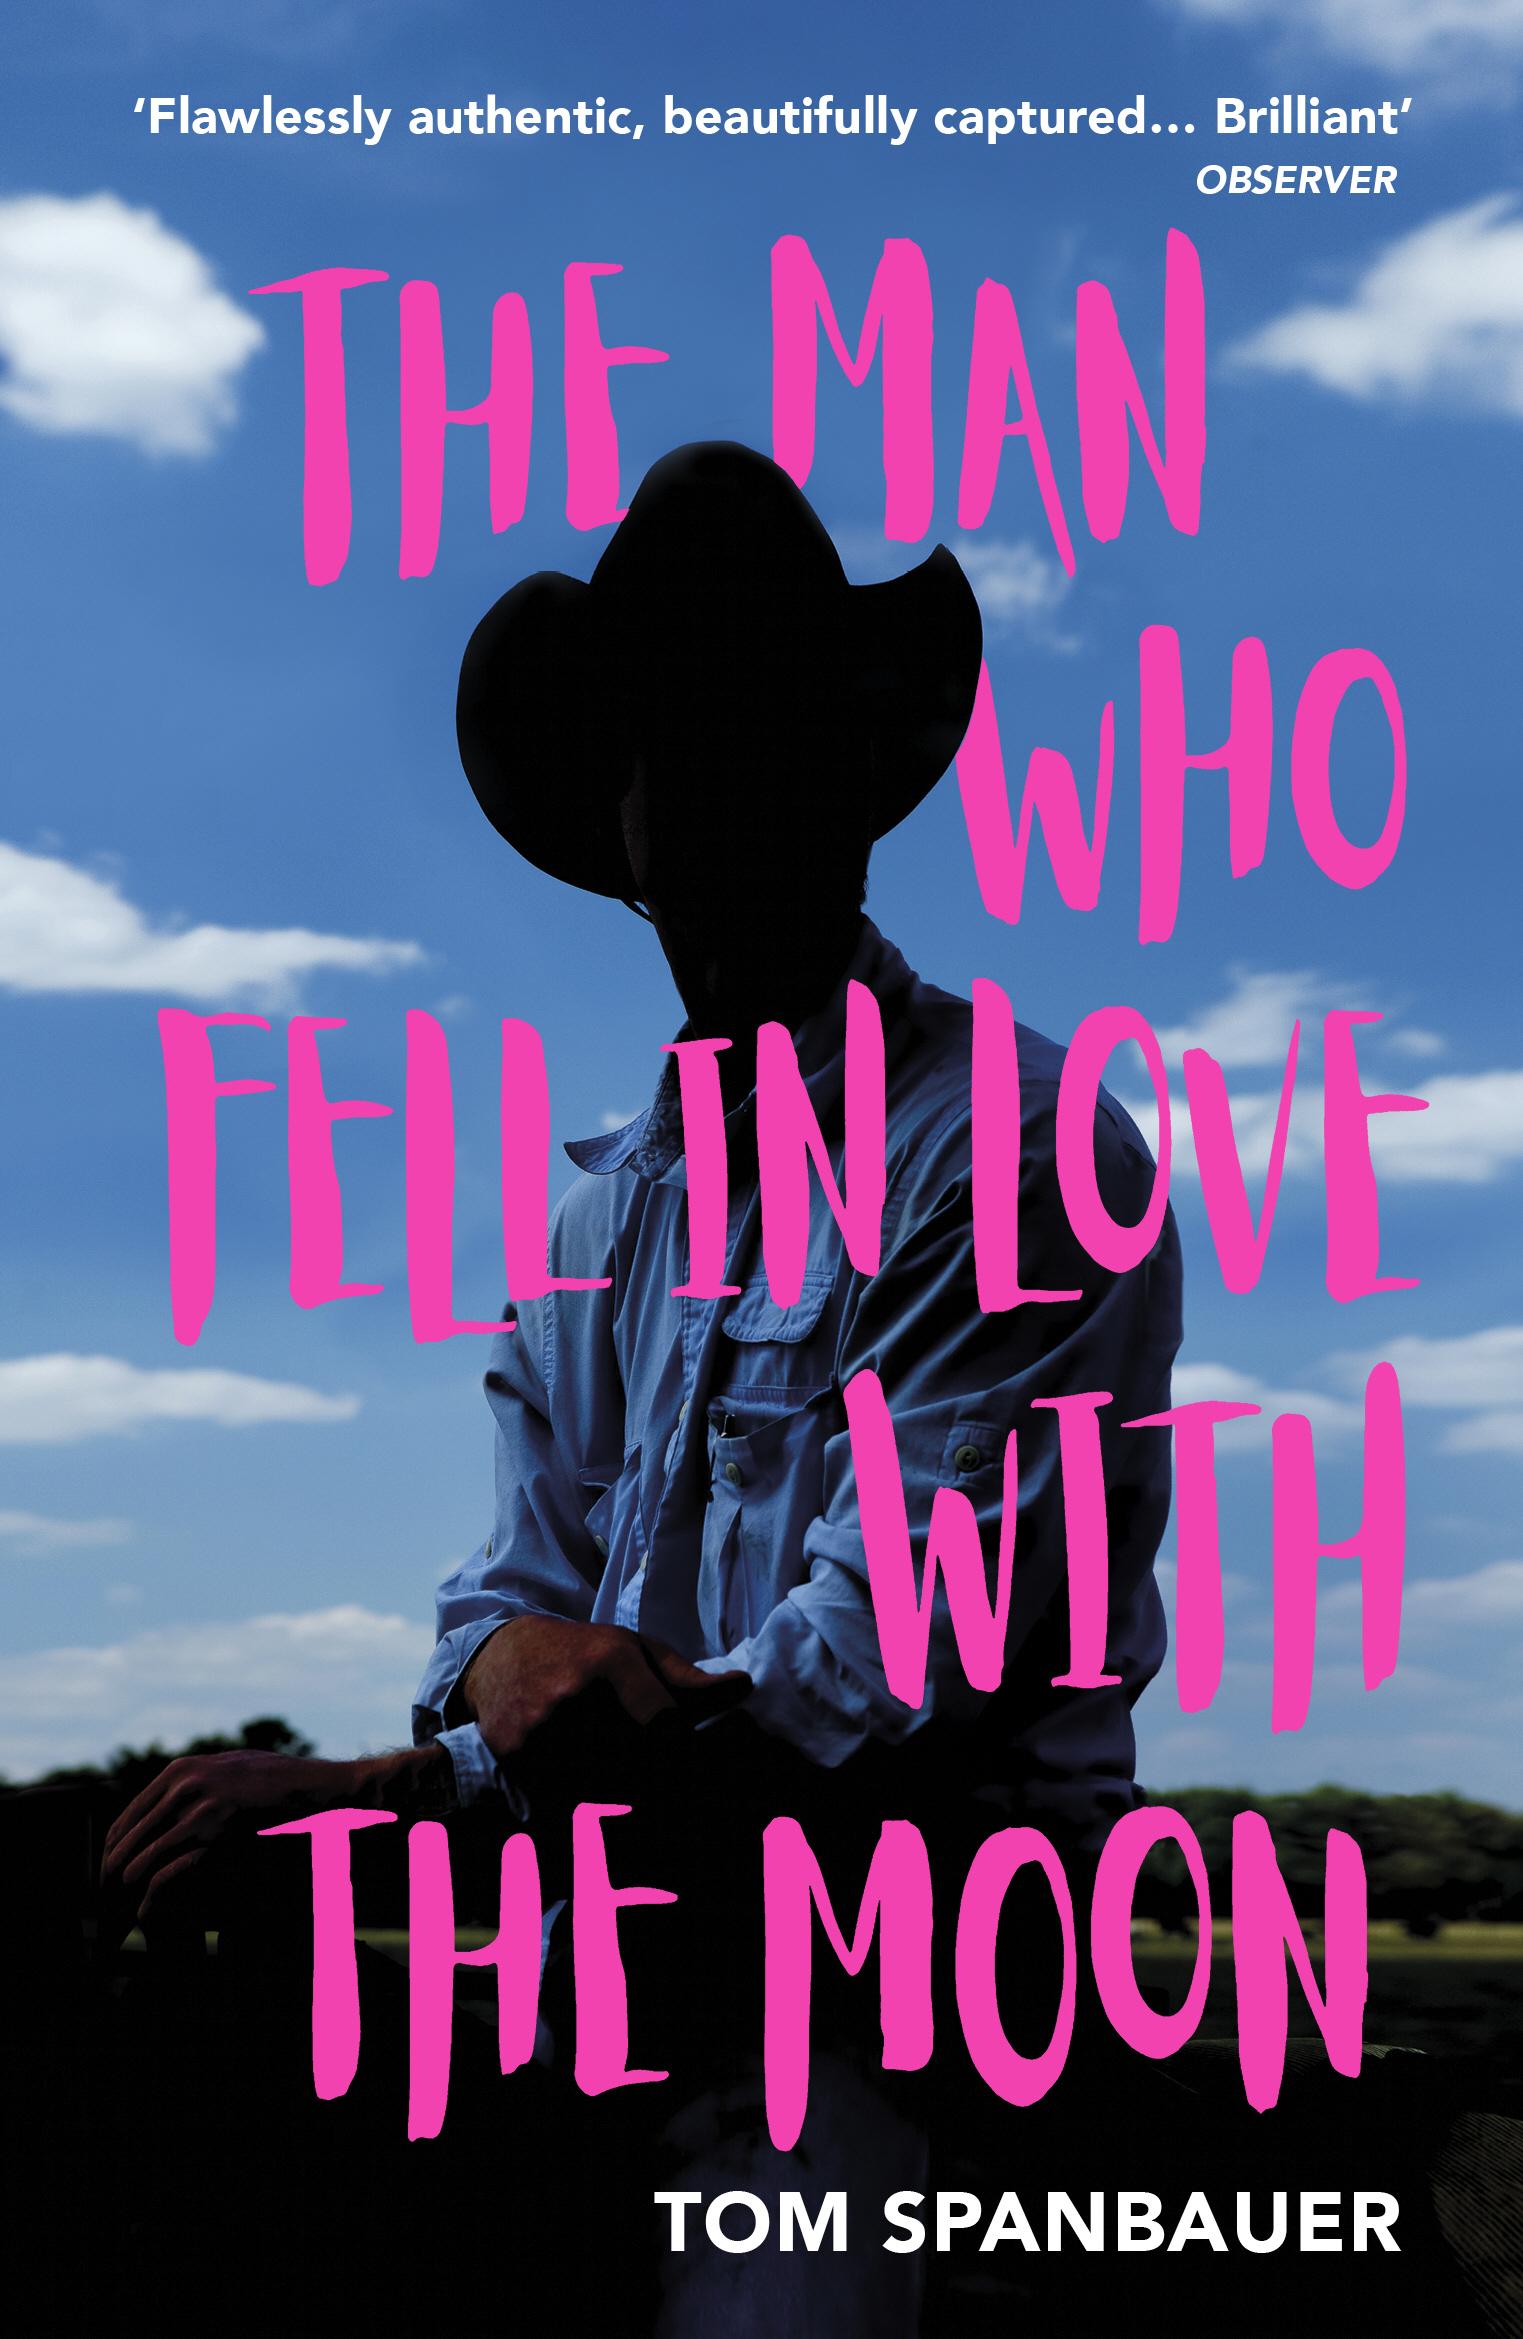 Man Who Fell In Love With The Moon - Tom Spanbauer